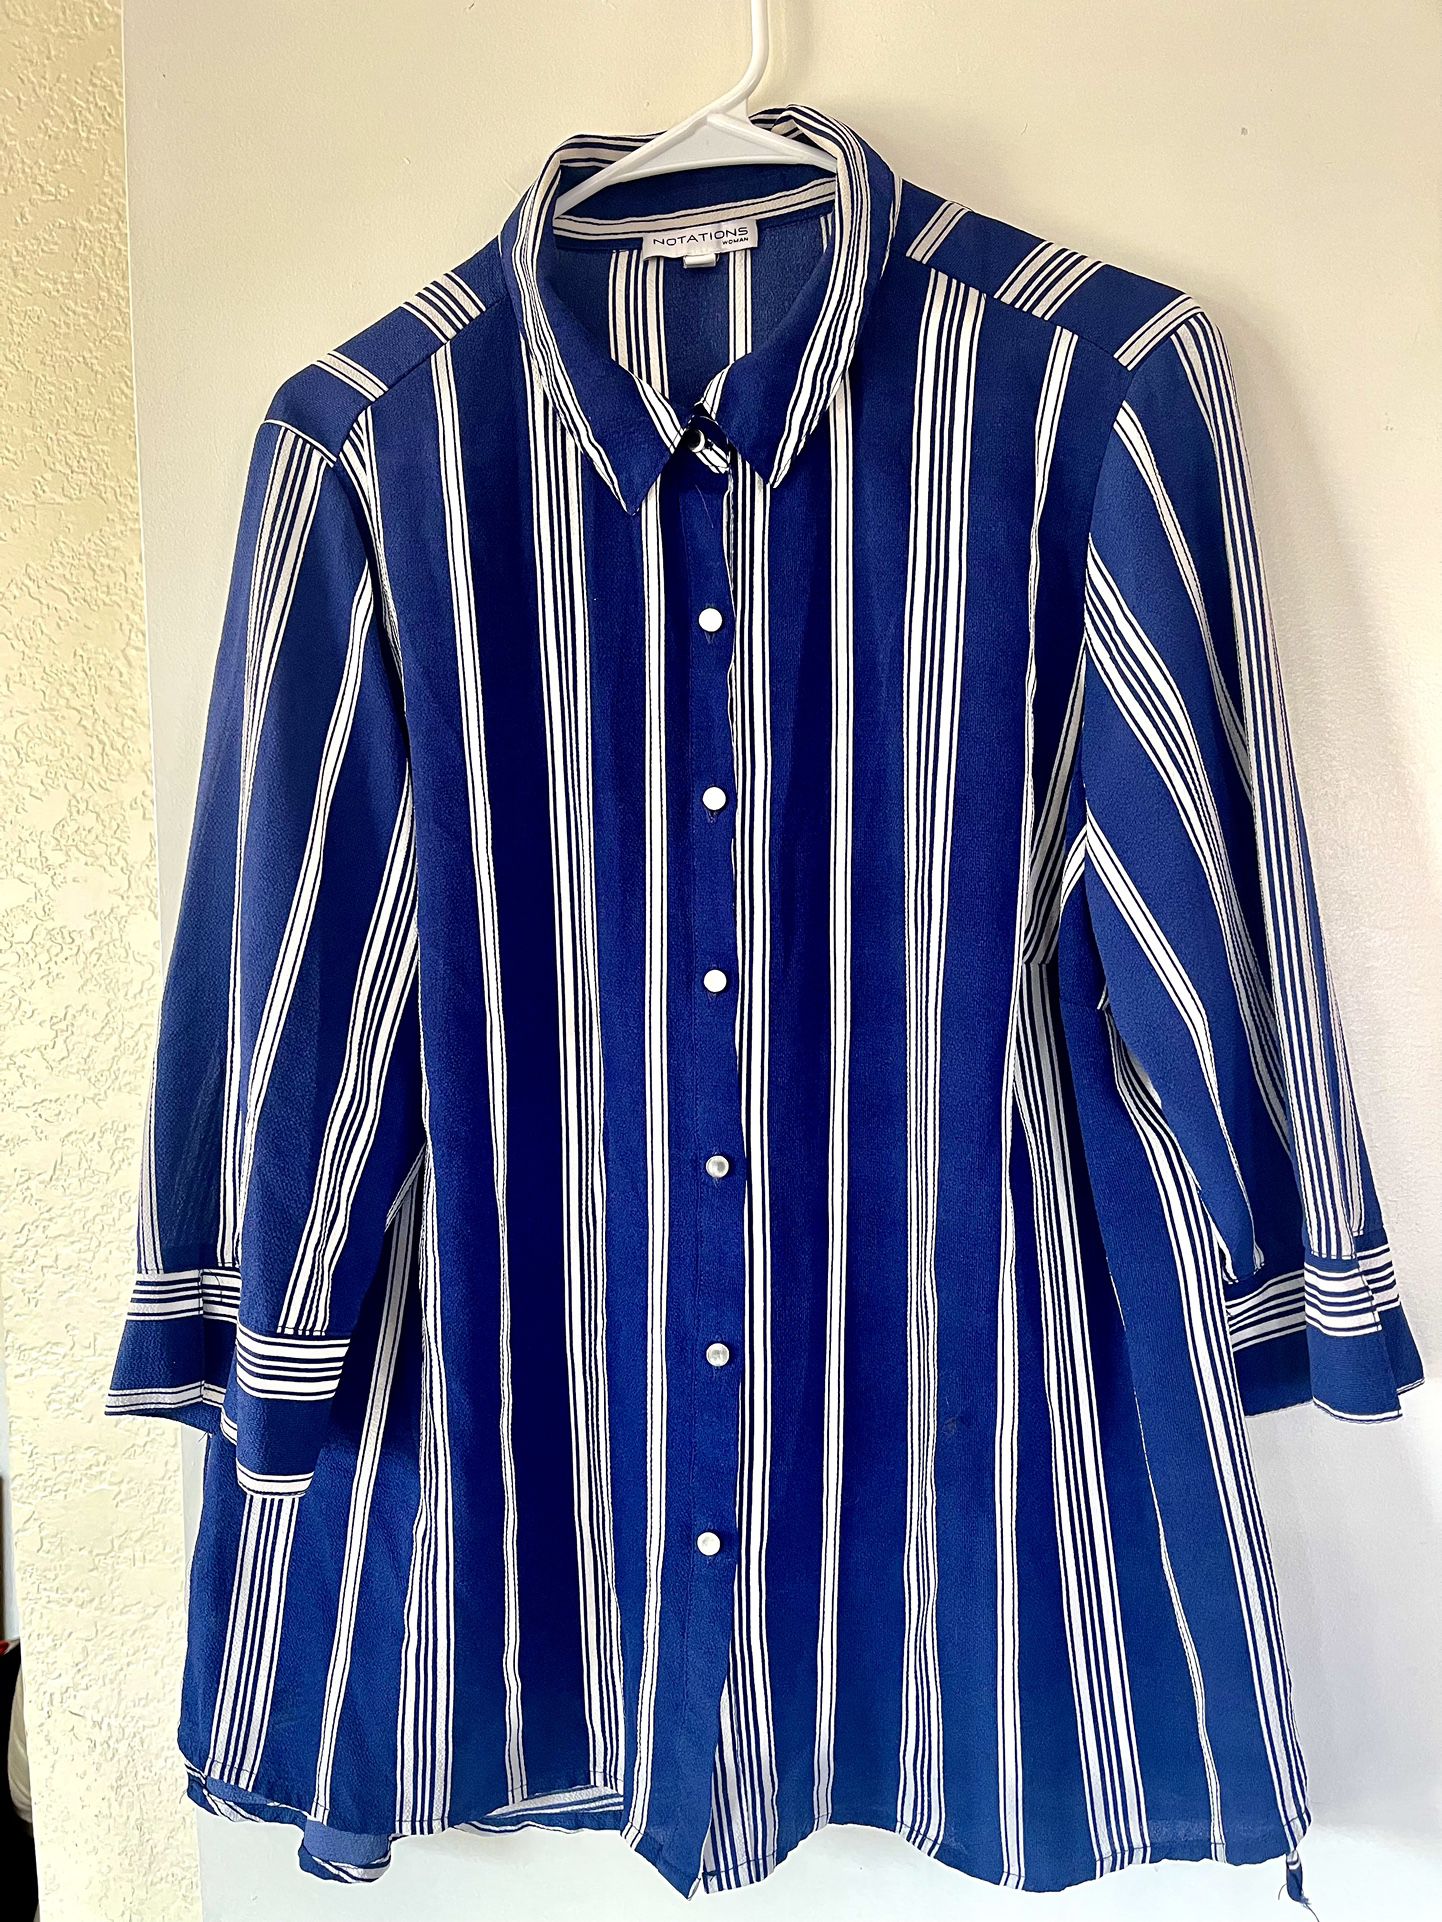 Womens Sanctuary Blue/White Striped Long Sleeve Button Up Blouse/Tunic Size 2X